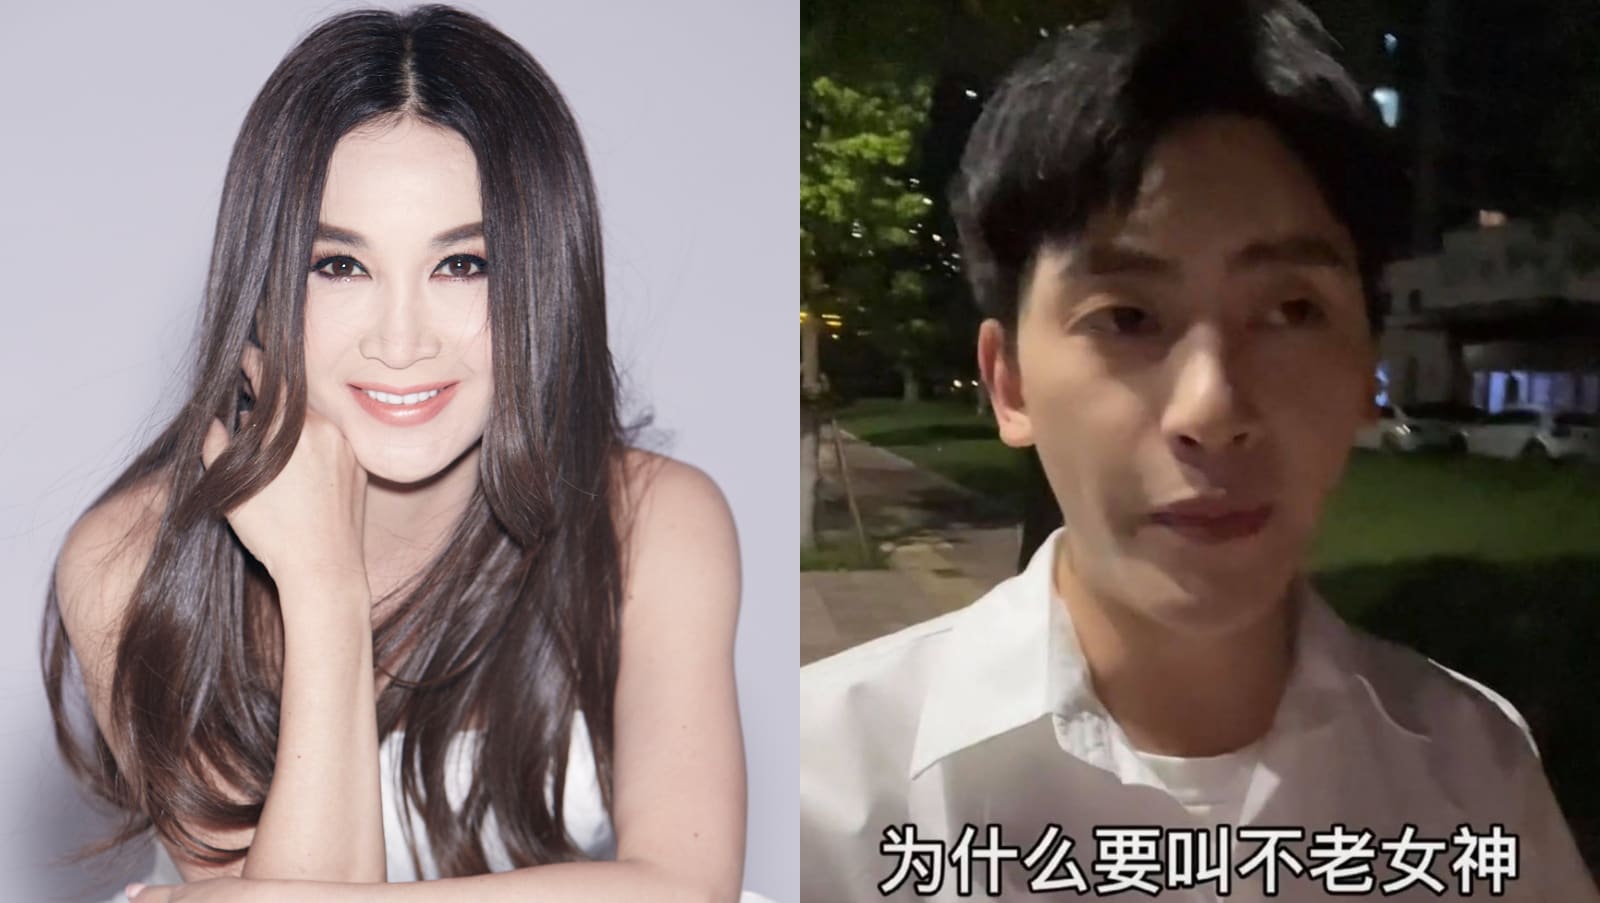 Is Irene Wan, 55, The 'Ageless Goddess' Who Scolded A Chinese Influencer For Calling Her An “Ageless Goddess”?